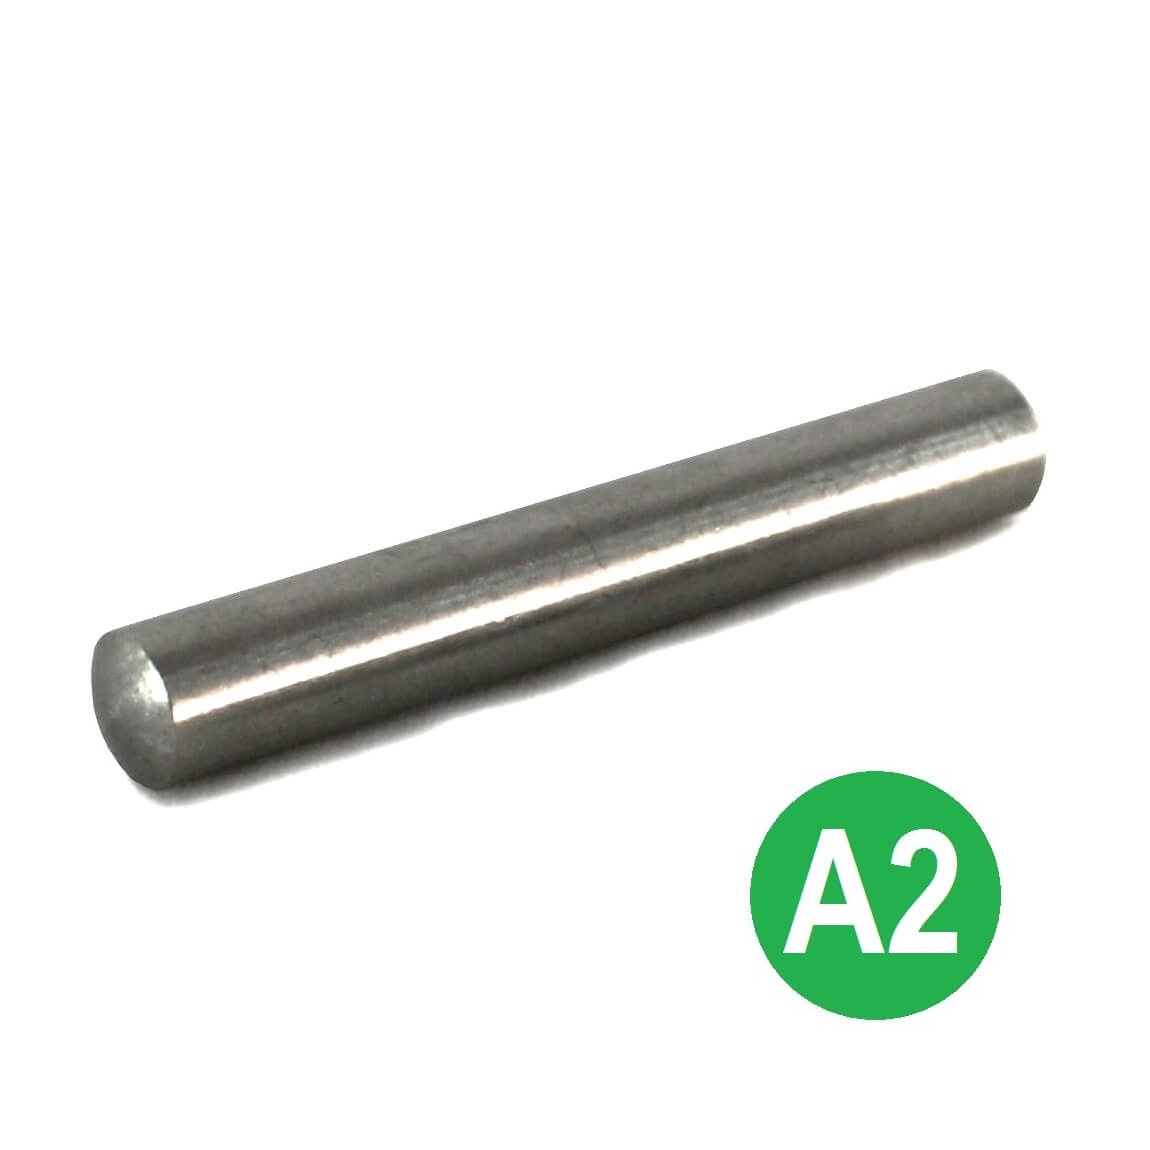 6mm Dia x 20mm A2 Stainless Dowel Pins DIN 7